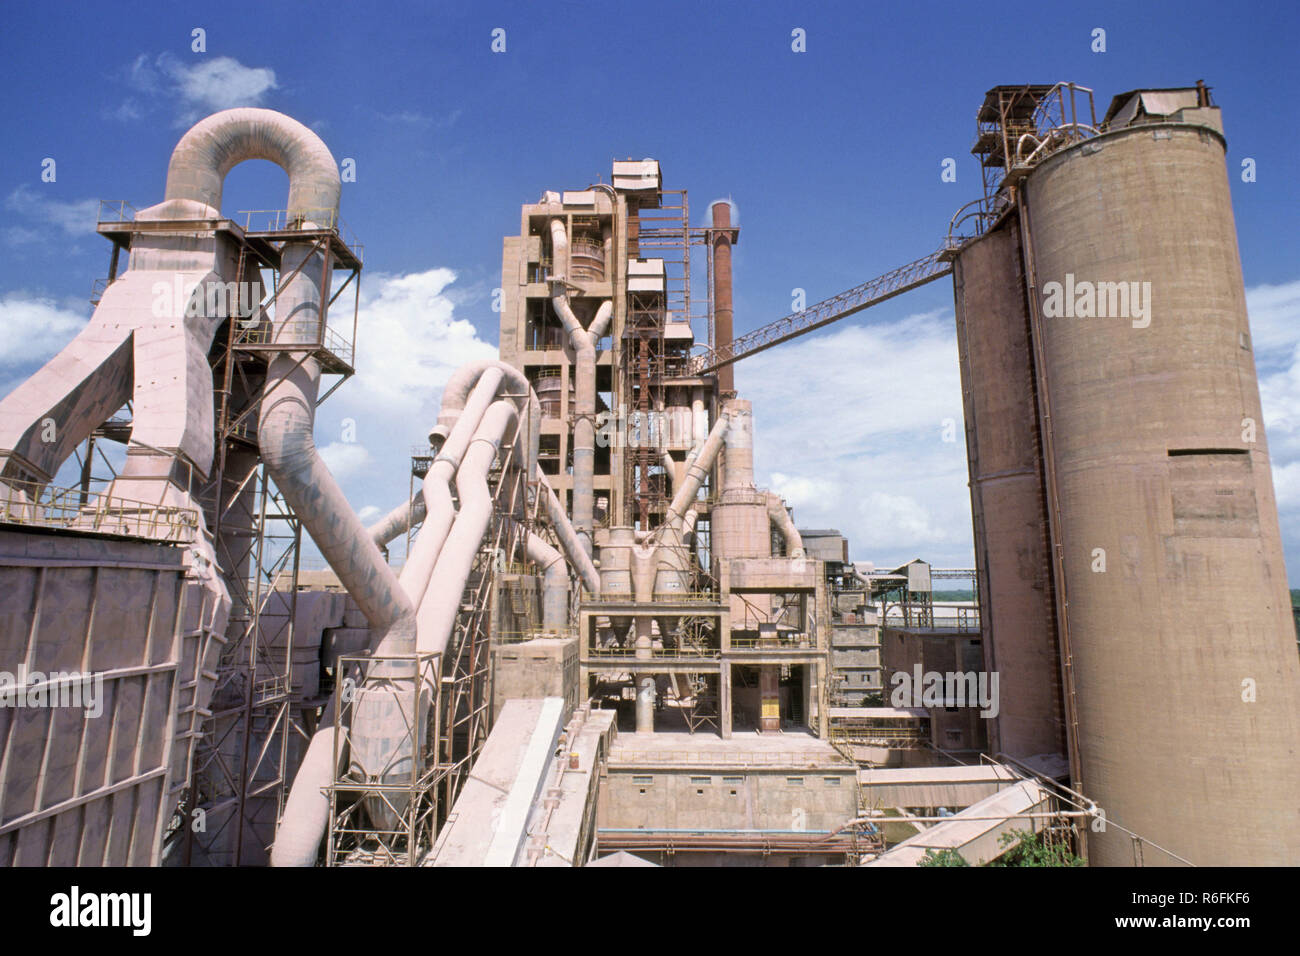 Cement Factory India High Resolution Stock Photography and Images - Alamy